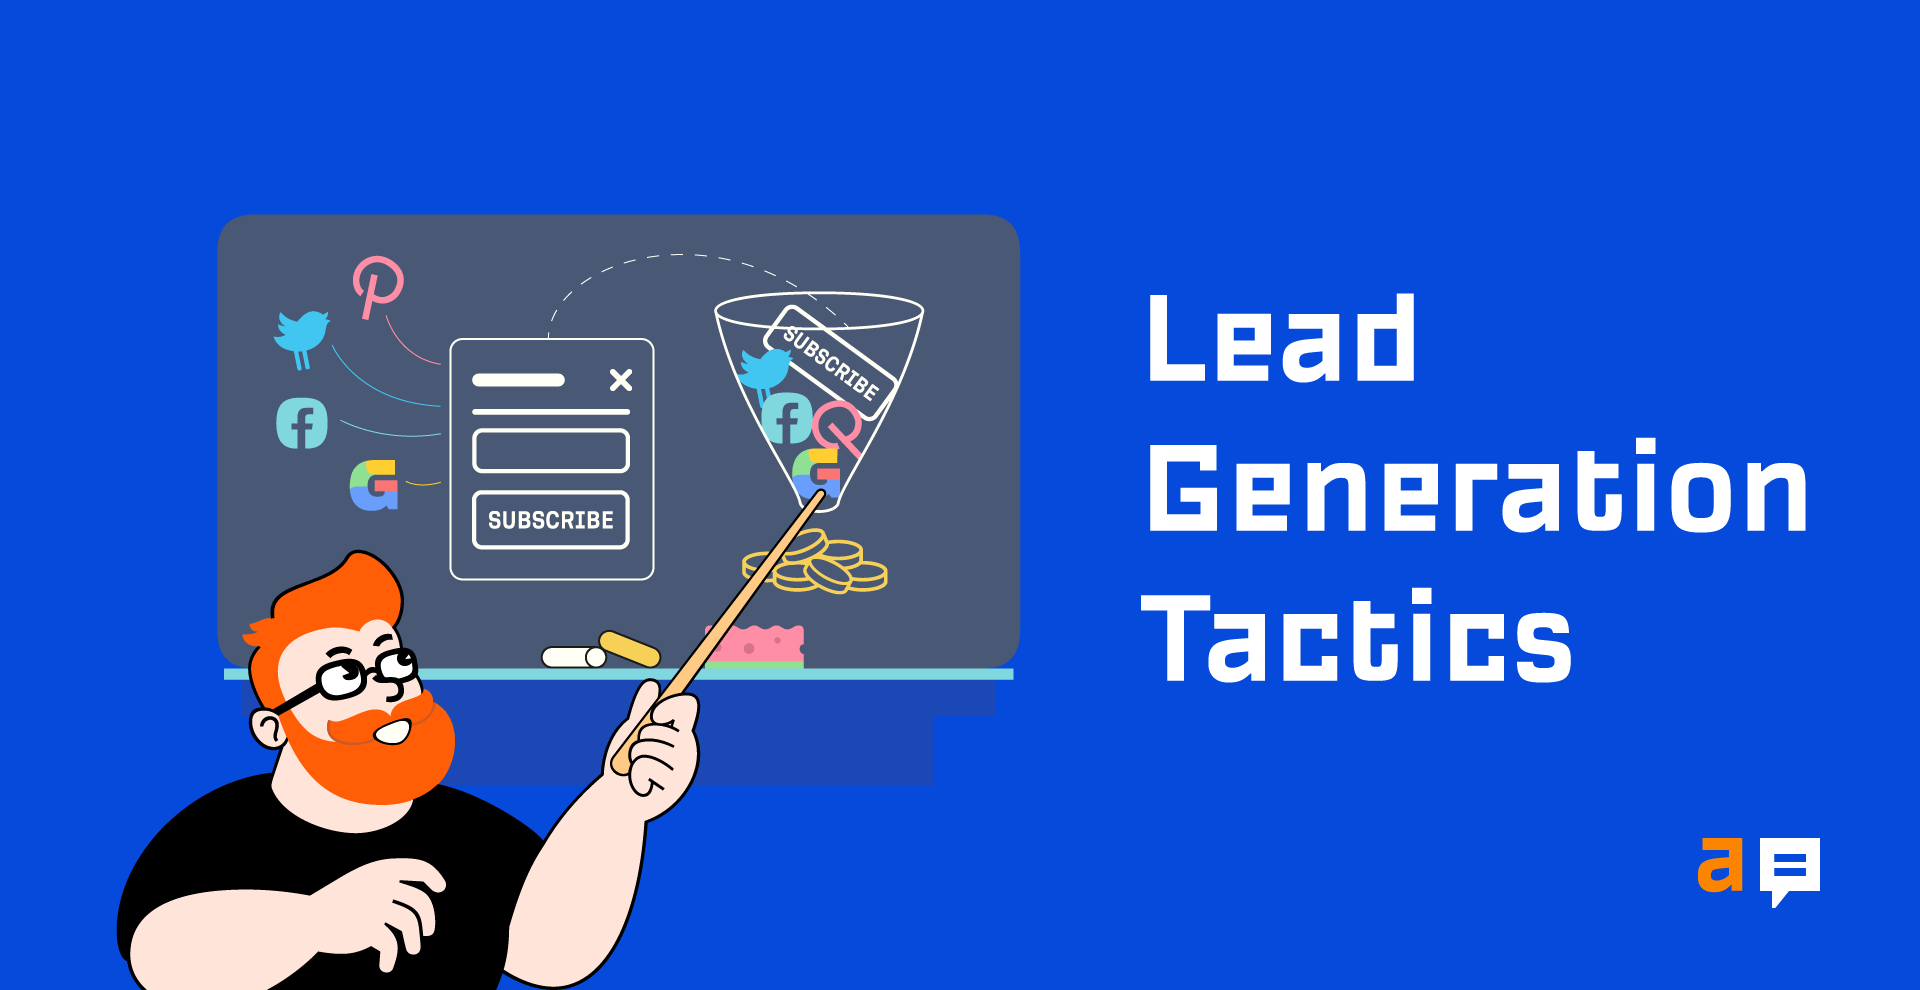 10 Lead Generation Tactics That Work (With Examples)